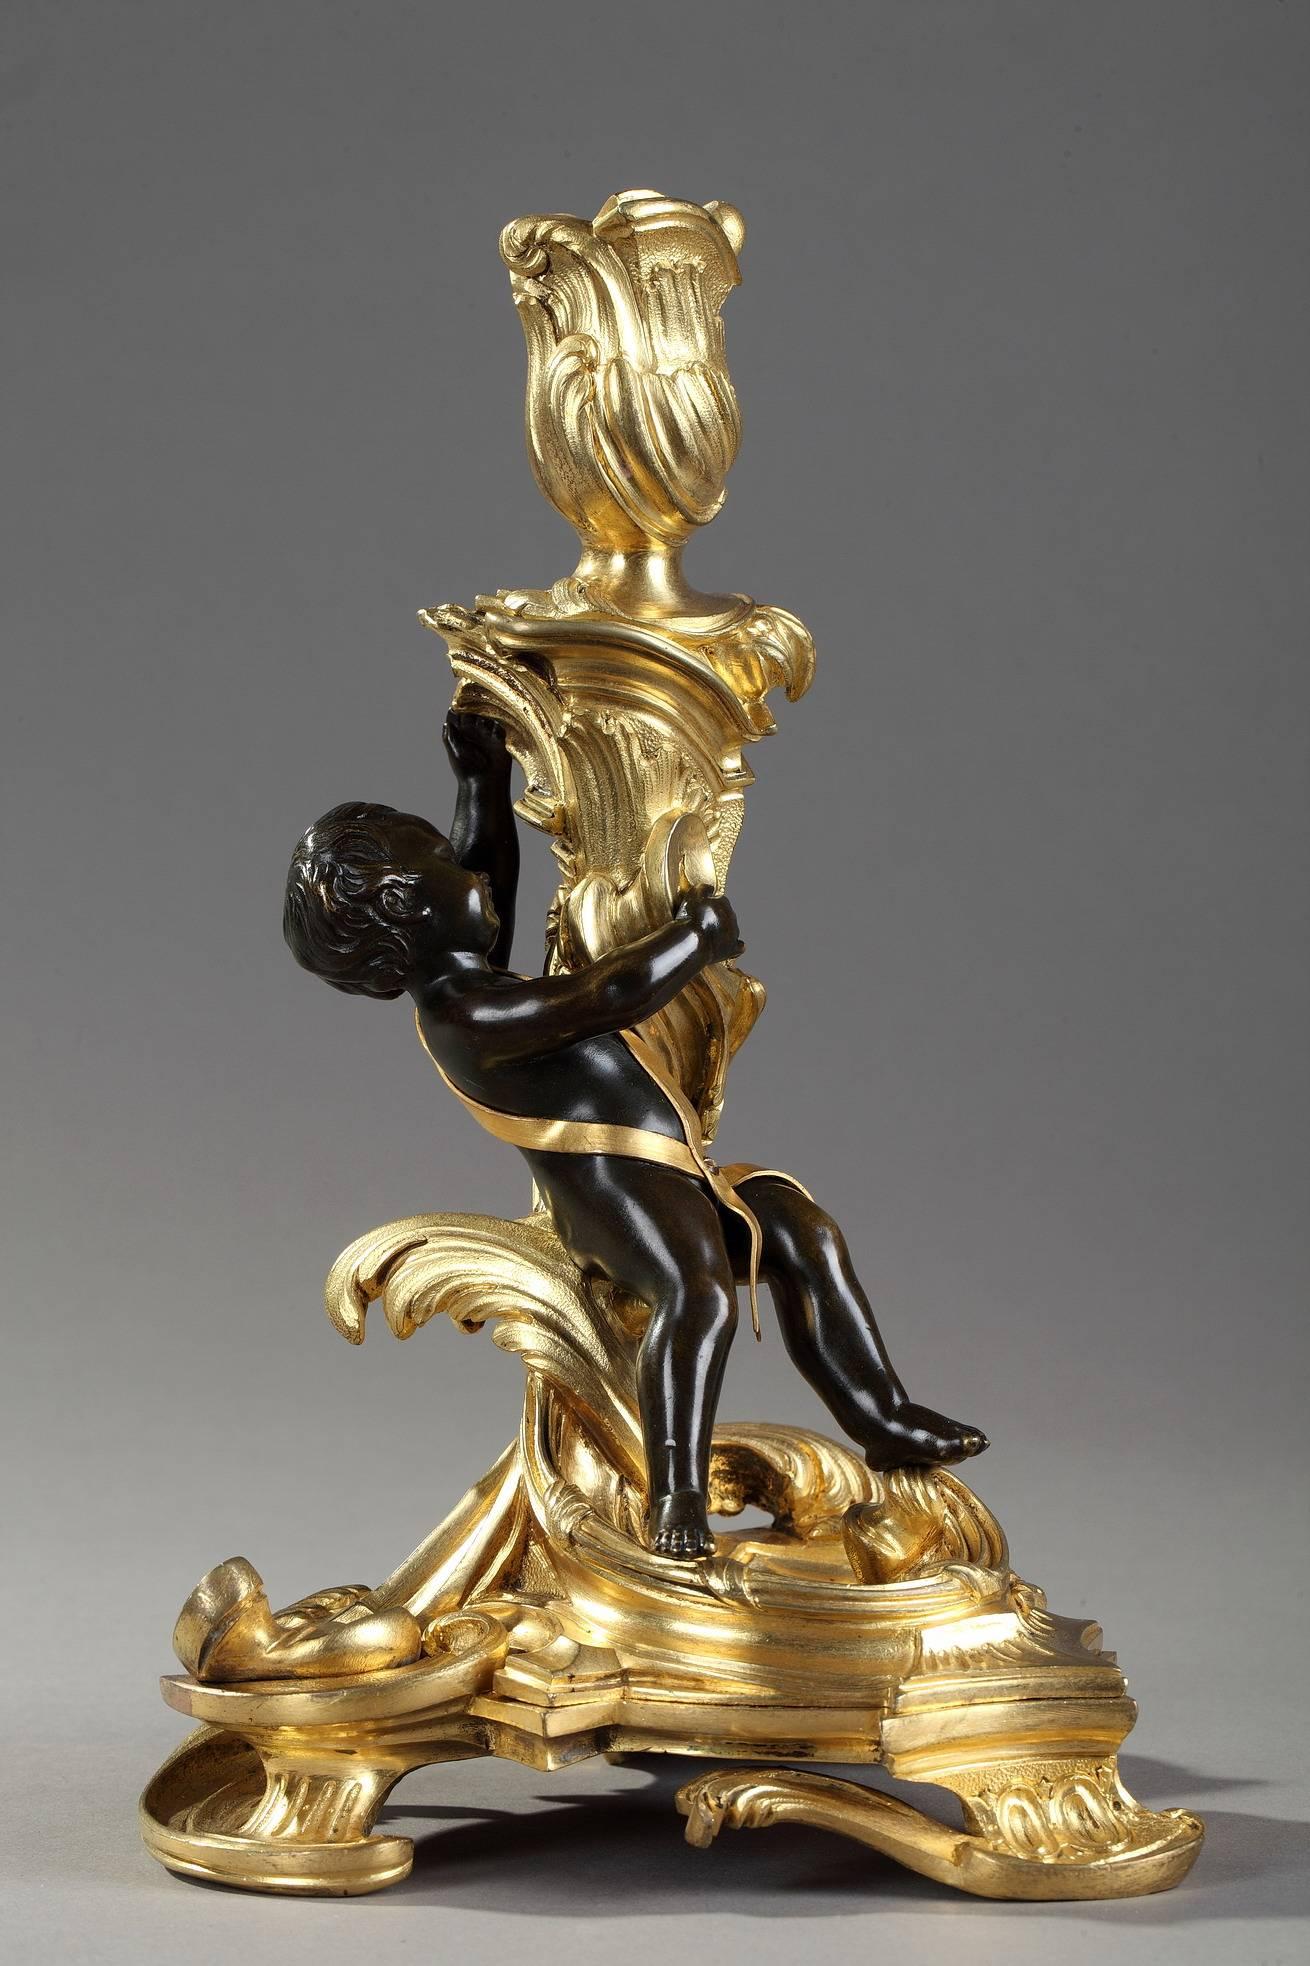 Rococo Pair of Gilt and Patinated Bronze Candlesticks after a Model by Meissonnier